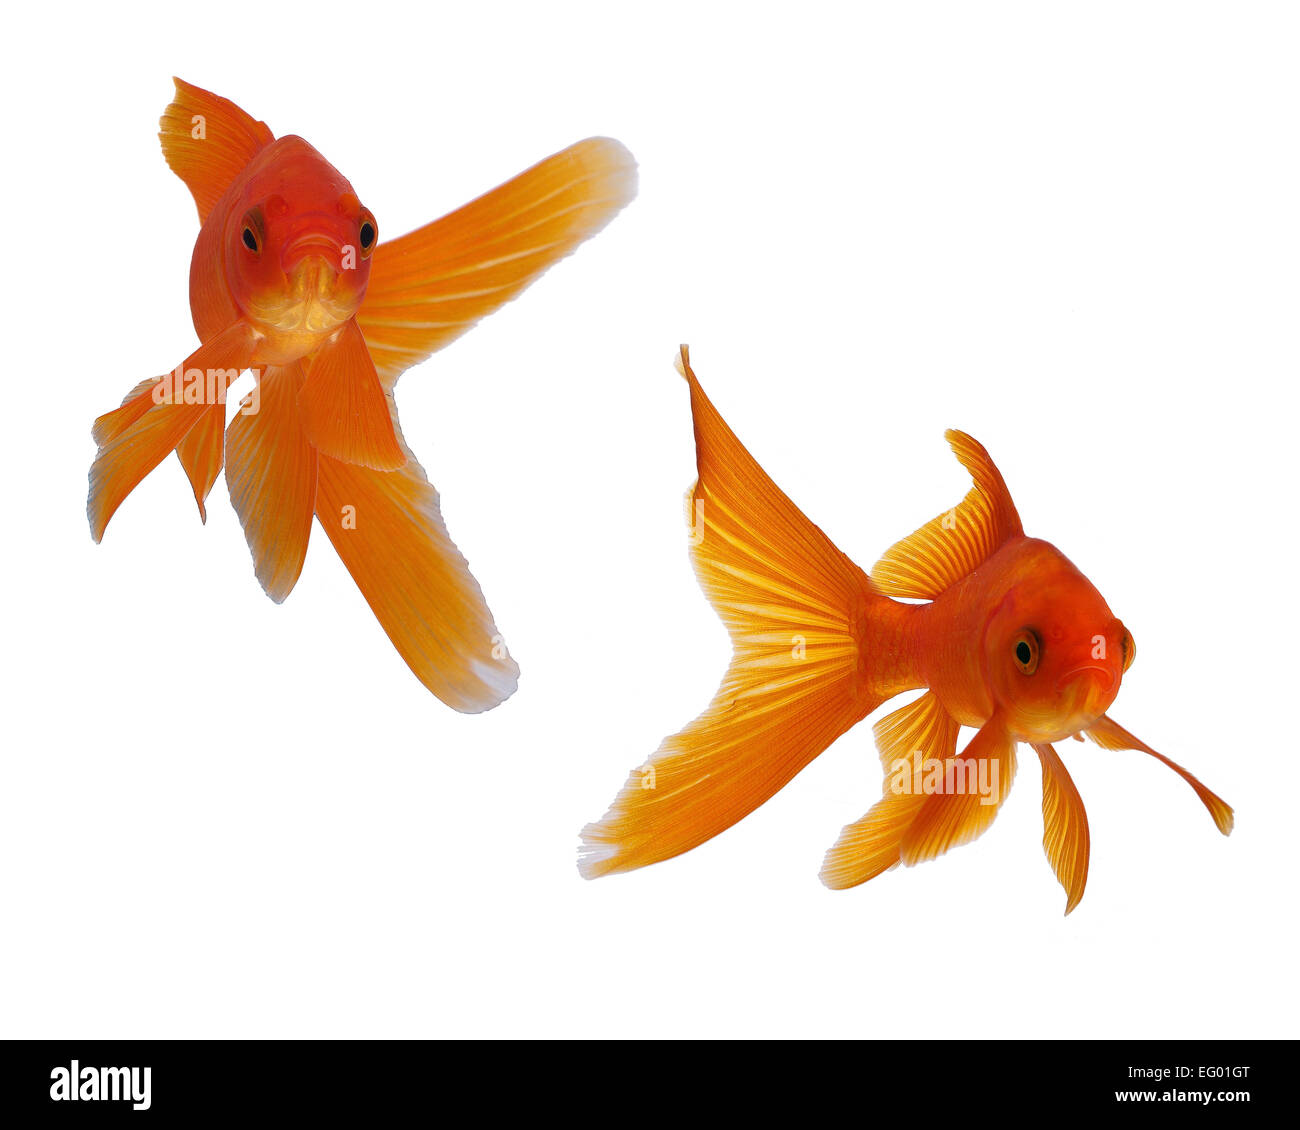 two ornate goldfish face on to camera Stock Photo